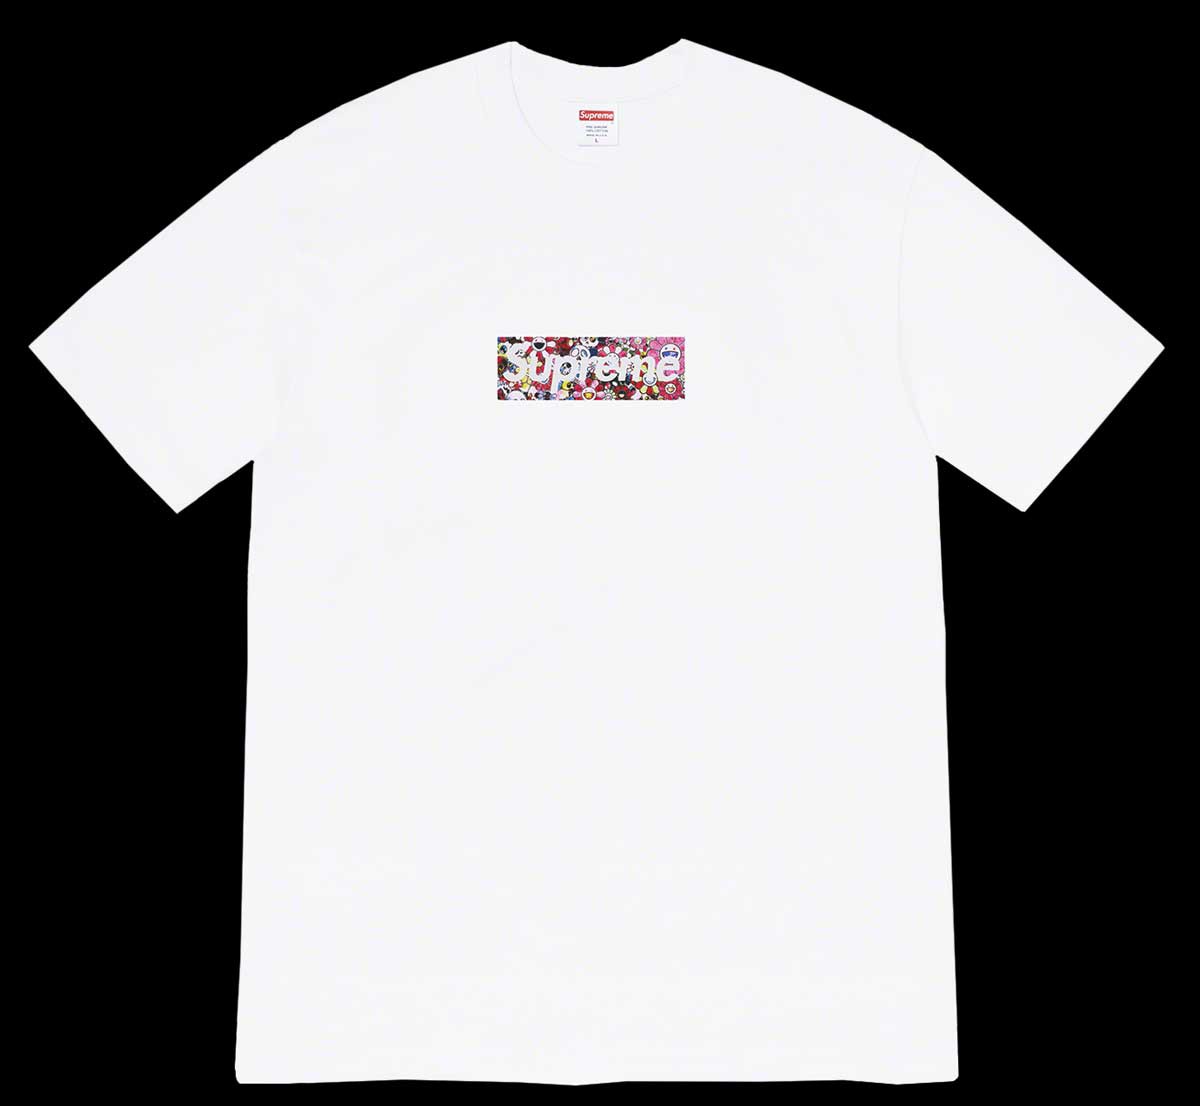 Supreme Leaks News on X: Supreme have revealed their box logo tee in aid  of COVID-19 relief, featuring original artwork by Takashi Murakami Click  for details of the release    /